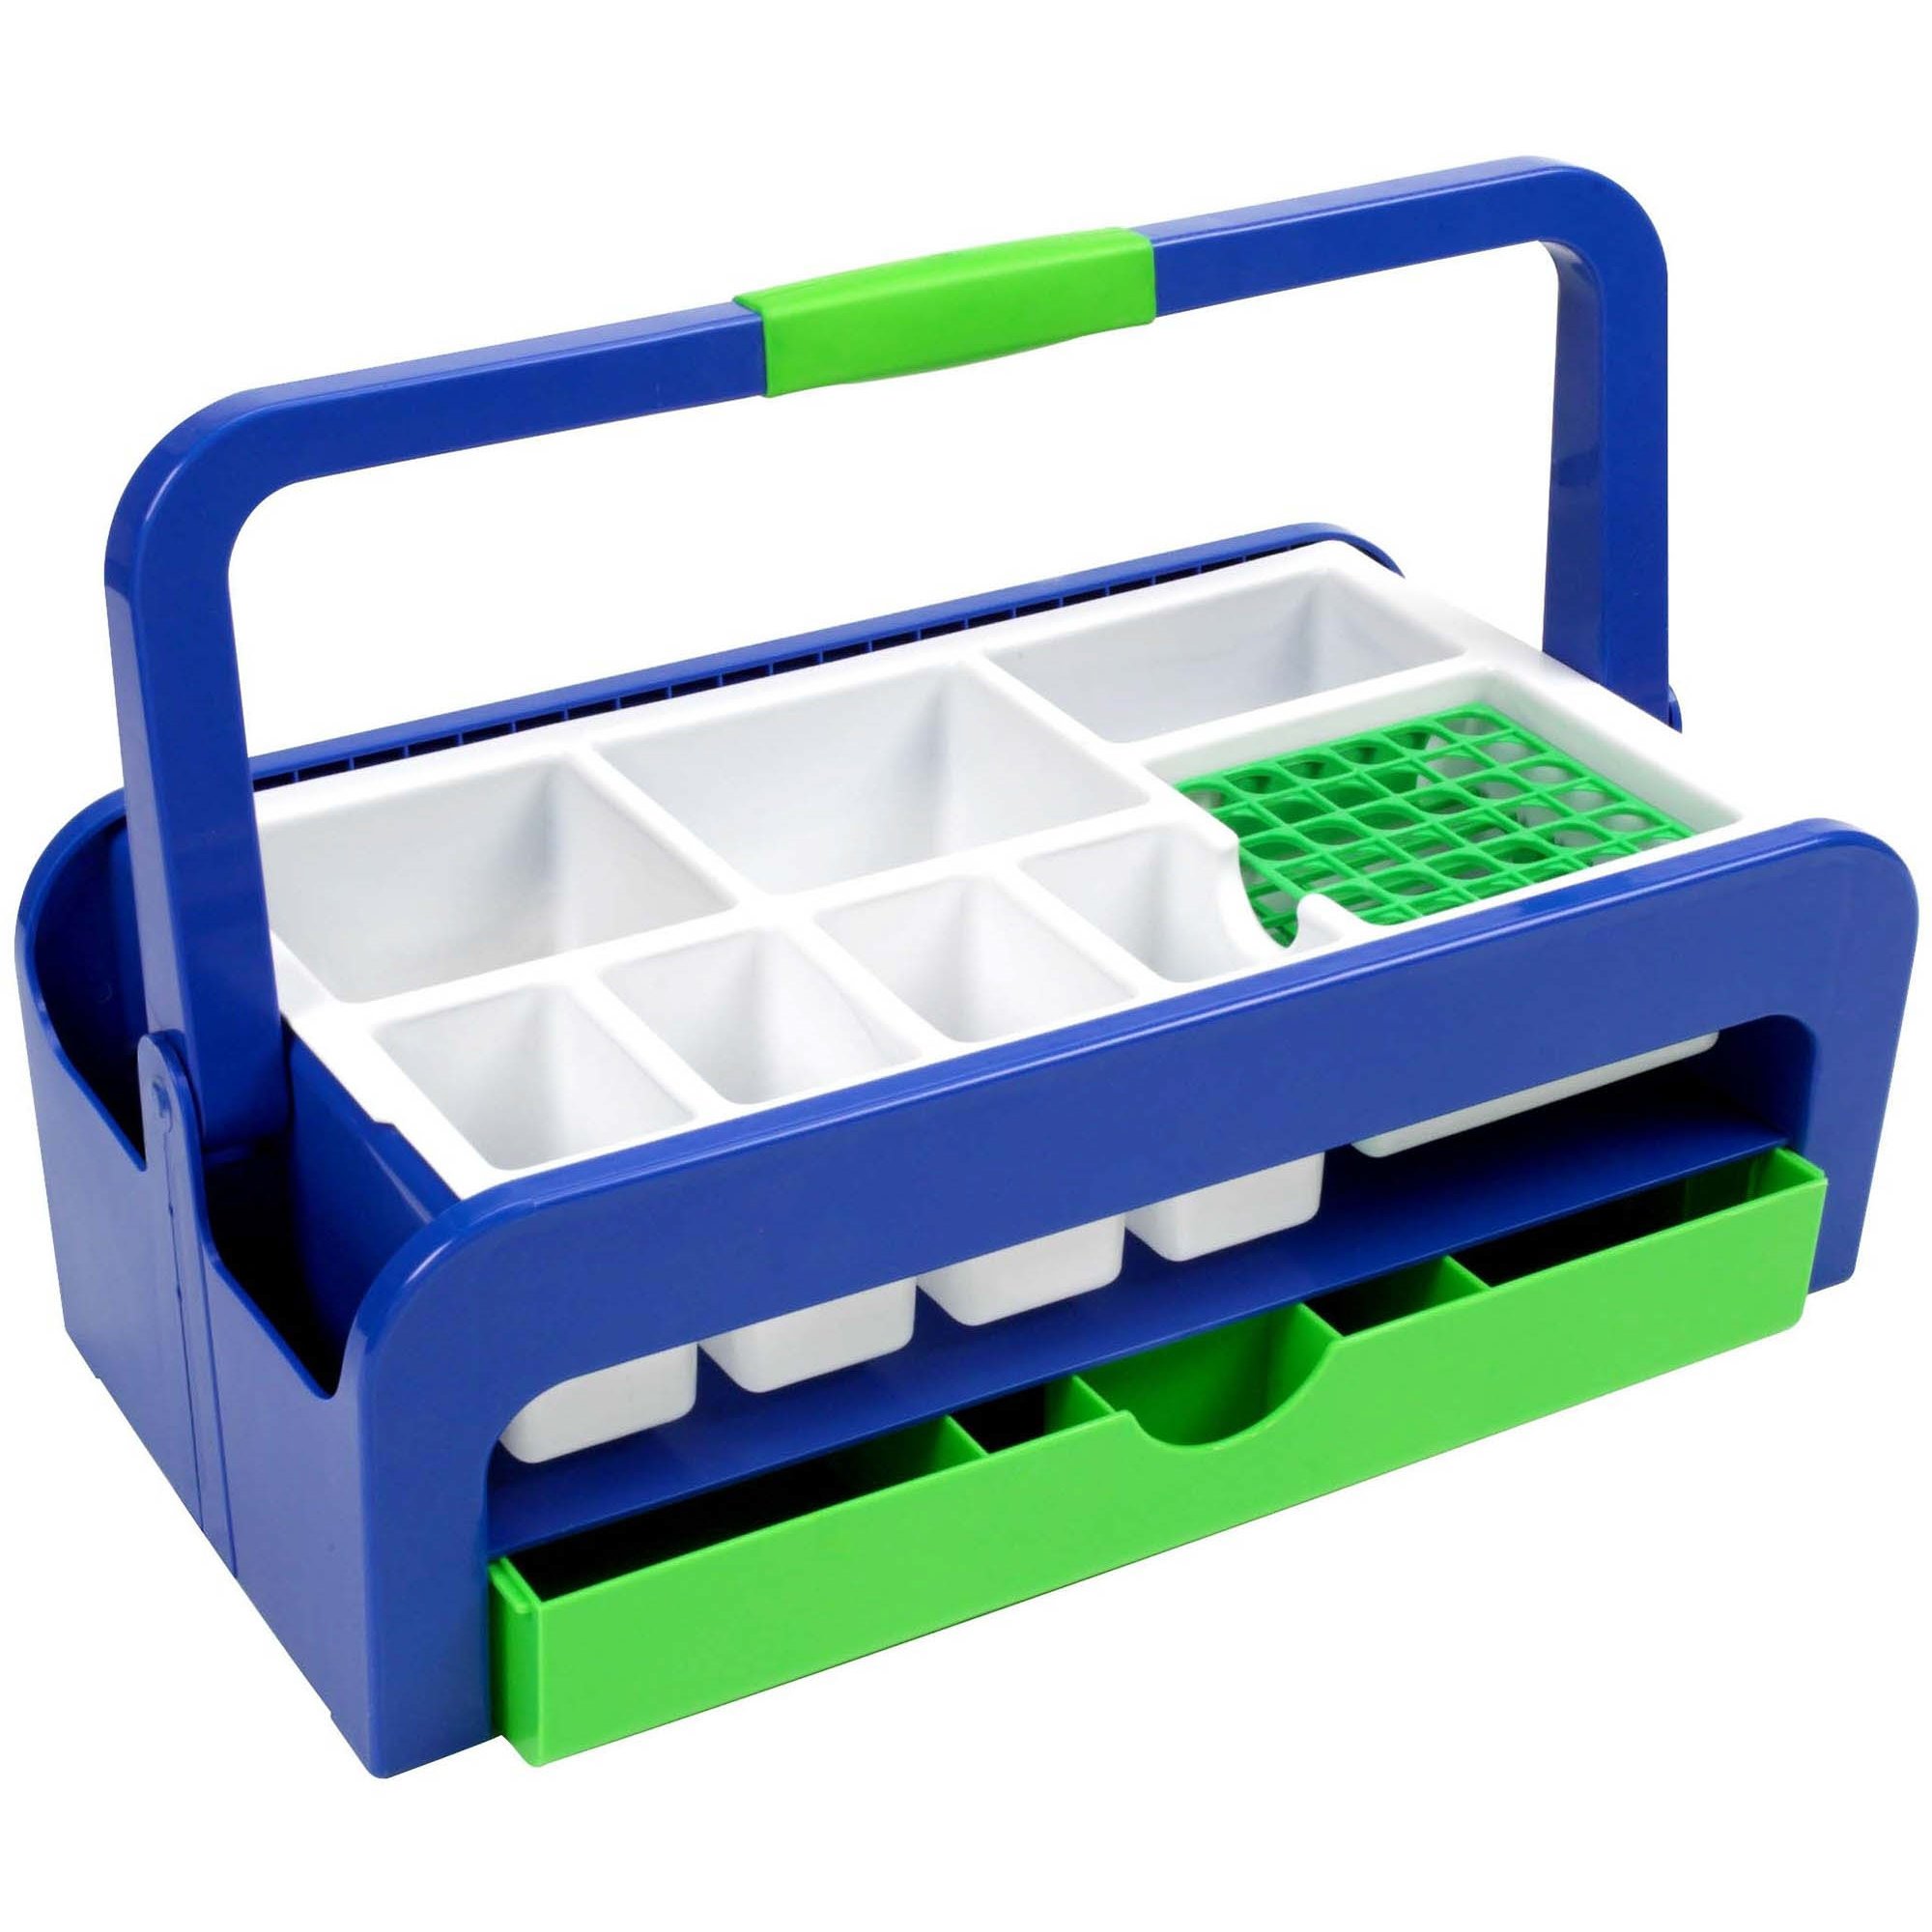 https://www.universalmedicalinc.com/media/catalog/product/cache/b4c565ddf1bc021465048acd78c313cc/h/s/hs2200a_droplet-blood-collection-tray-with-insert-style-a-and-13mm-tube-rack.jpg